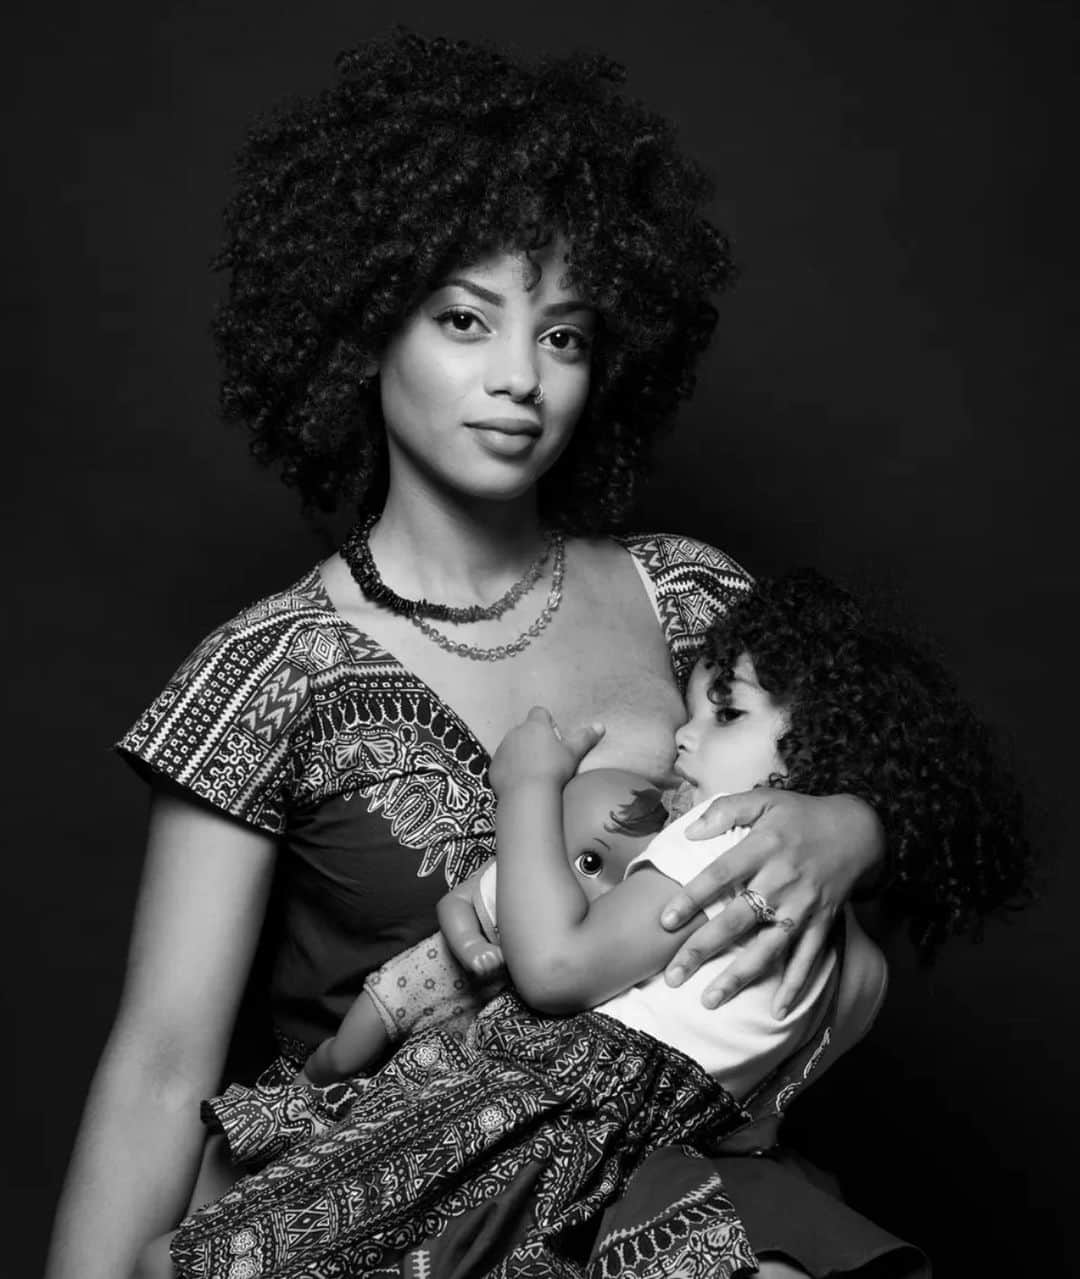 Huffington Postさんのインスタグラム写真 - (Huffington PostInstagram)「In honor of #BlackBreastfeedingWeek, HuffPost is resharing photos of proud breastfeeding mamas who discuss why they believe society needs to see more empowering images of Black women nursing their children.⁠⠀ ⁠⠀ Swipe through to see the beautiful photos.⁠⠀ ⁠⠀ 1. Anastasia West: "It is important for the public to see images of Black women breastfeeding because that would normalize the act and encourage positive attitudes toward Black women who chose to breastfeed.”⁠⠀ ⁠⠀ 2. Nicole Letizia: “If more Black breastfeeding moms were visible, there would most likely be a greater amount of programs available in a wider variety of communities to support them."⁠⠀ ⁠⠀ 3. Fatima Mills: “I think it's important for the mainstream public to see images of Black moms of all economic groups breastfeeding because it will have the greatest impact on the [breastfeeding] success rates in Black communities; it will no longer be looked at something only for the poor of foreign nations or the wealthy who can afford to stay home." ⁠⠀ ⁠⠀ 4. Stephanie Fearse: “I just want Black women to see that we can and we do breastfeed and it's beautiful. Whatever way we choose to feed our children, breastfeeding should be a part of those options."⁠⠀ ⁠⠀ 5. Angela Richardson: “It's extremely important for the public to know that our bodies are not to be objectified but to be praised for our abilities to carry our children with such ease and grace and also provide vital nourishment to them."⁠⠀ ⁠⠀ 6. Rachel Rogers-Ebert: "I often see publicity that's pro-breastfeeding geared toward Caucasian women. I feel it's important that Black women be included in this topic. We need to feel that breastfeeding is safe, natural and supported.”⁠⠀ ⁠⠀ 7. Tasha Cunningham: "It is important for others to know that there are Black women who breastfeed because it dismantles the racist belief that Black women are not maternal. This stereotype was systematically perpetuated during slavery when we were denied the right to care for and nurse our children. By creating images of us nursing, we normalize the practice of breastfeeding and end the sexual objectification of our bodies.”⁠⠀ ⁠⠀ Read more - link in bio! 📷@damondahlen」8月26日 10時11分 - huffpost